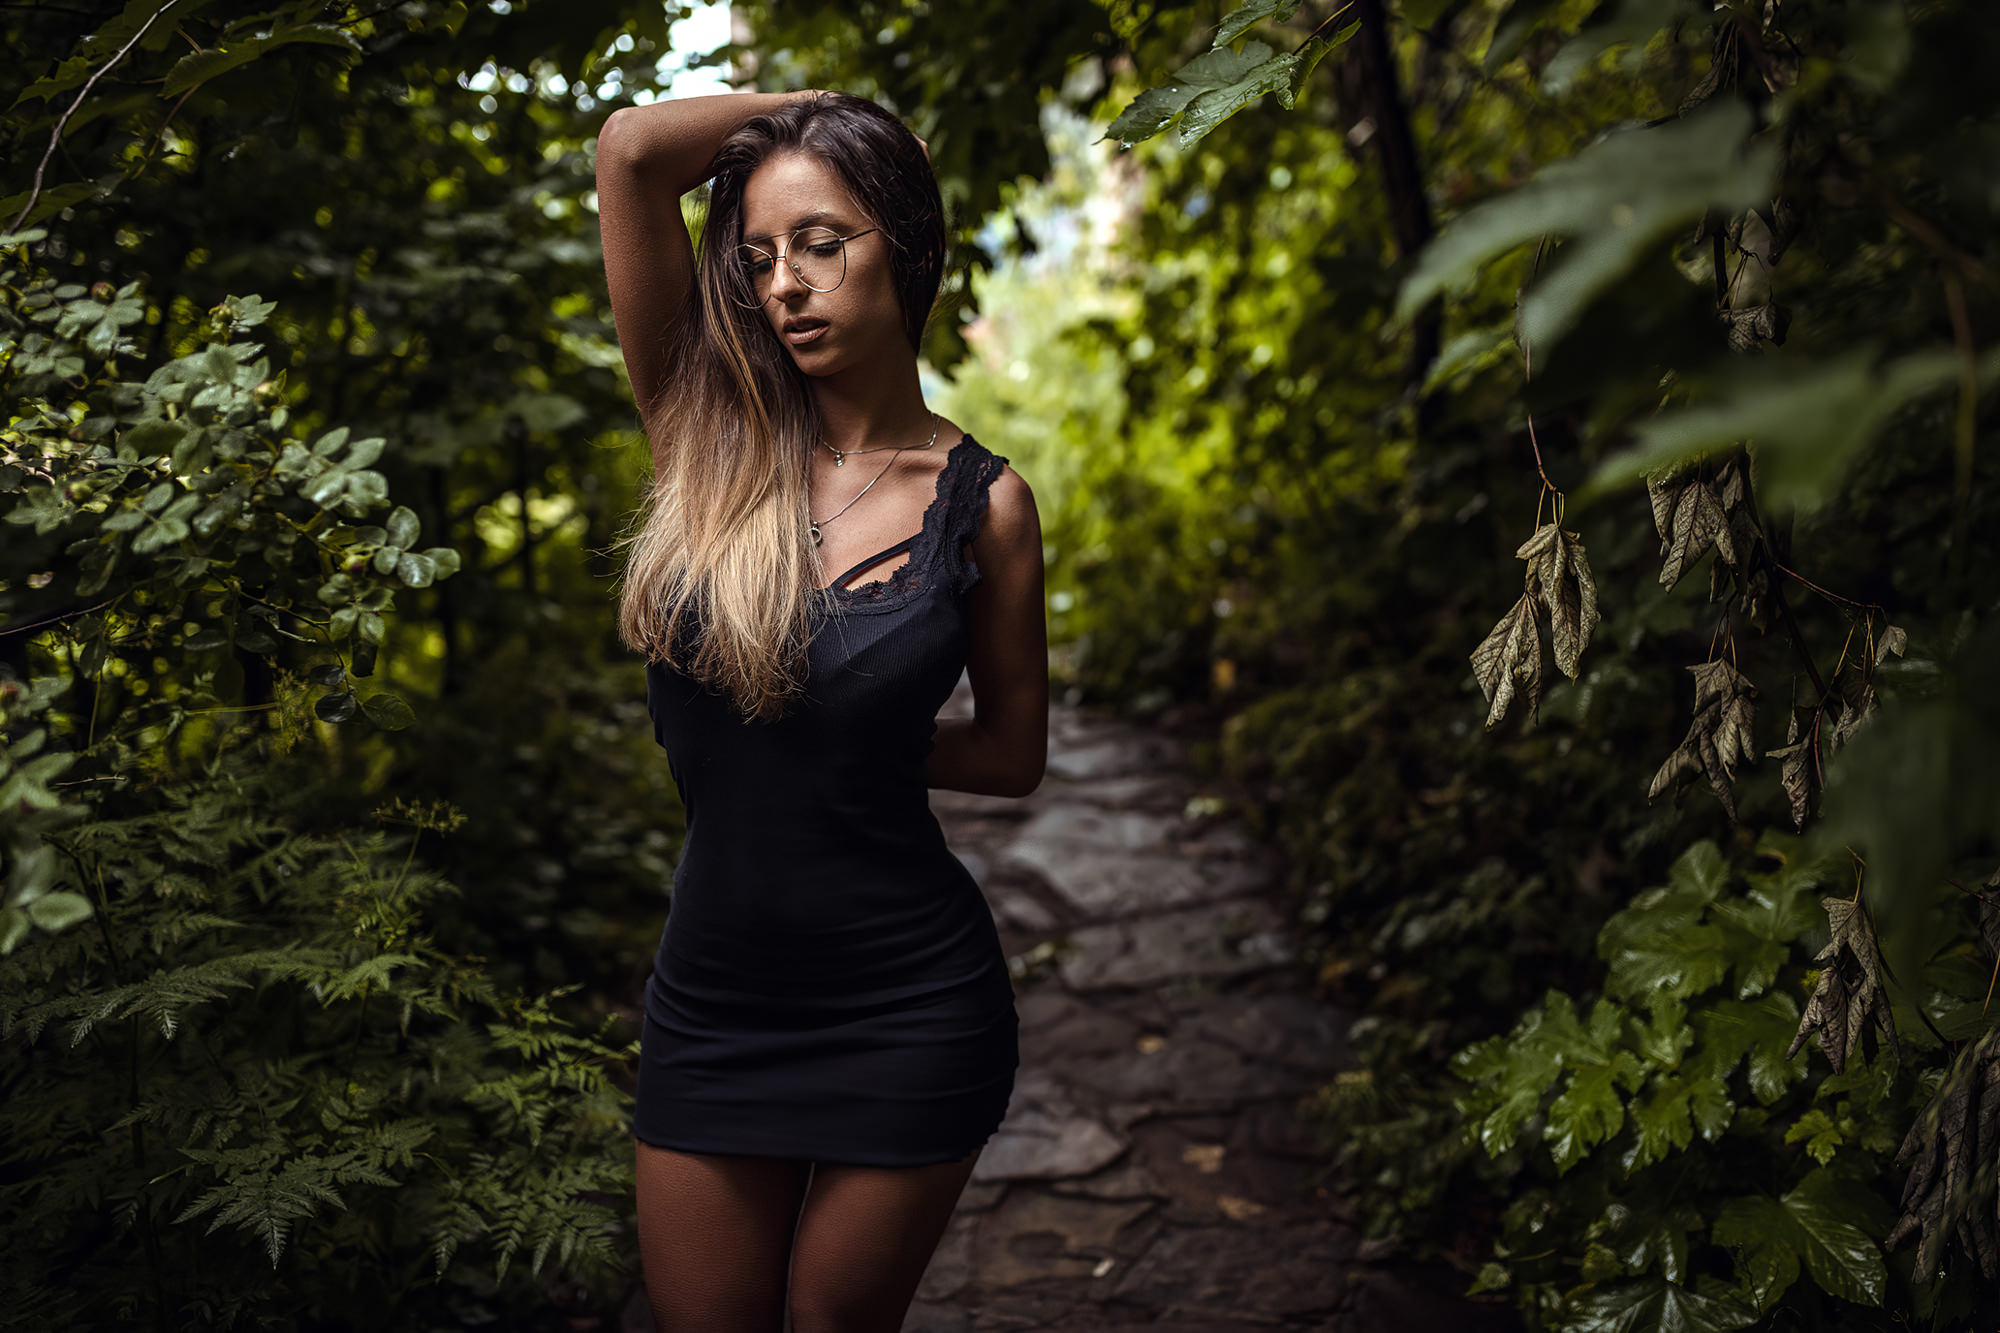 Women Brunette Women With Glasses Black Dress Hips Dyed Hair Women Outdoors Necklace Long Hair Tight 2000x1333